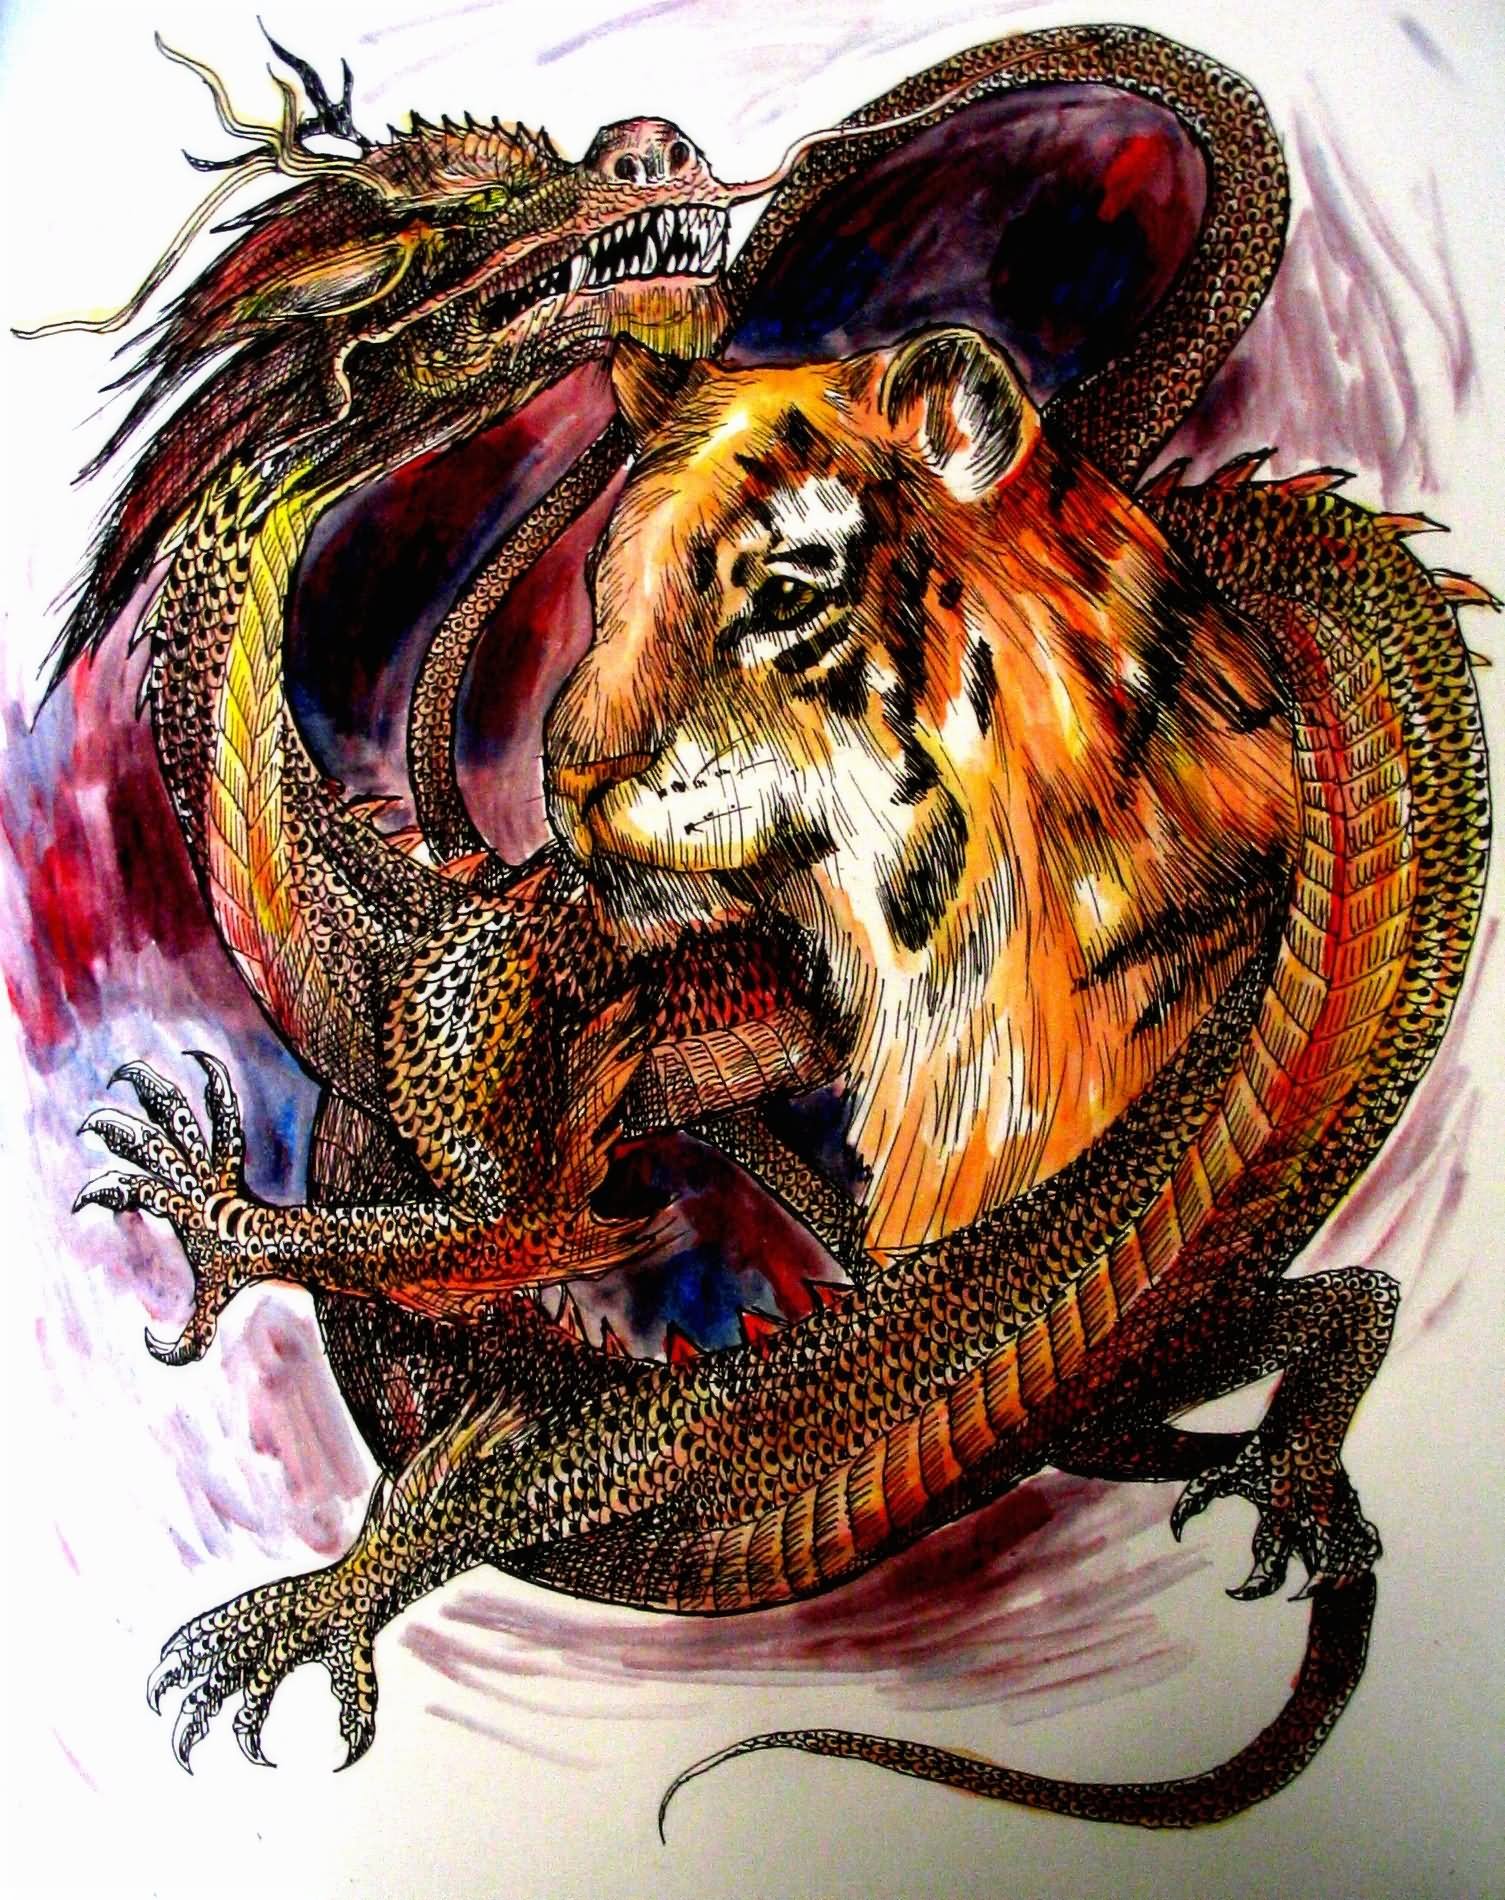 Awesome Colorful Dragon & Tiger Tattoo Design